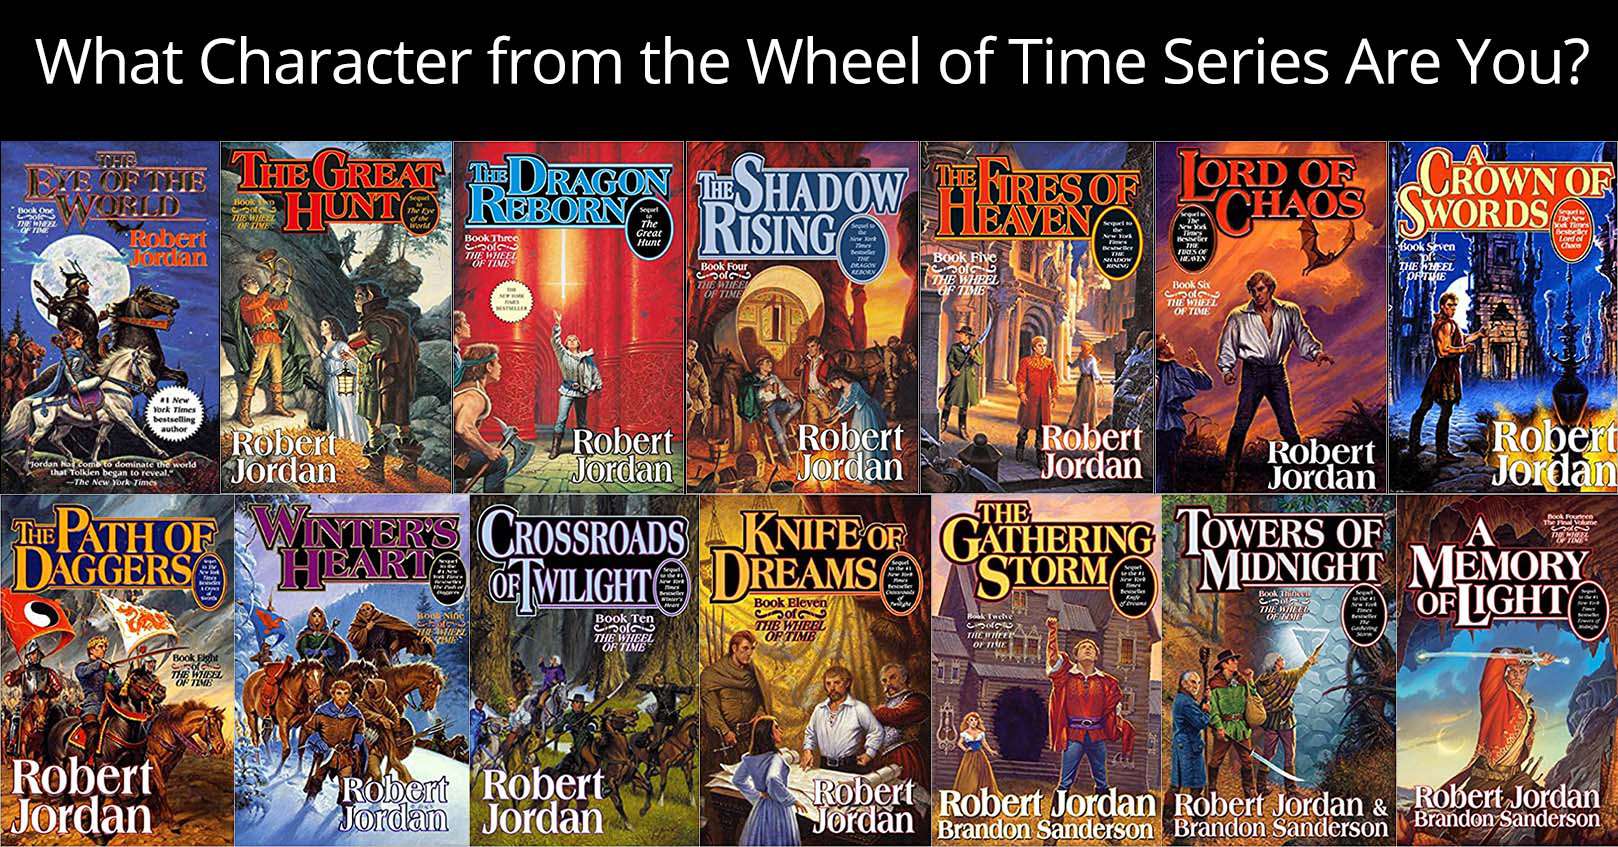 characters from the Wheel of Time series